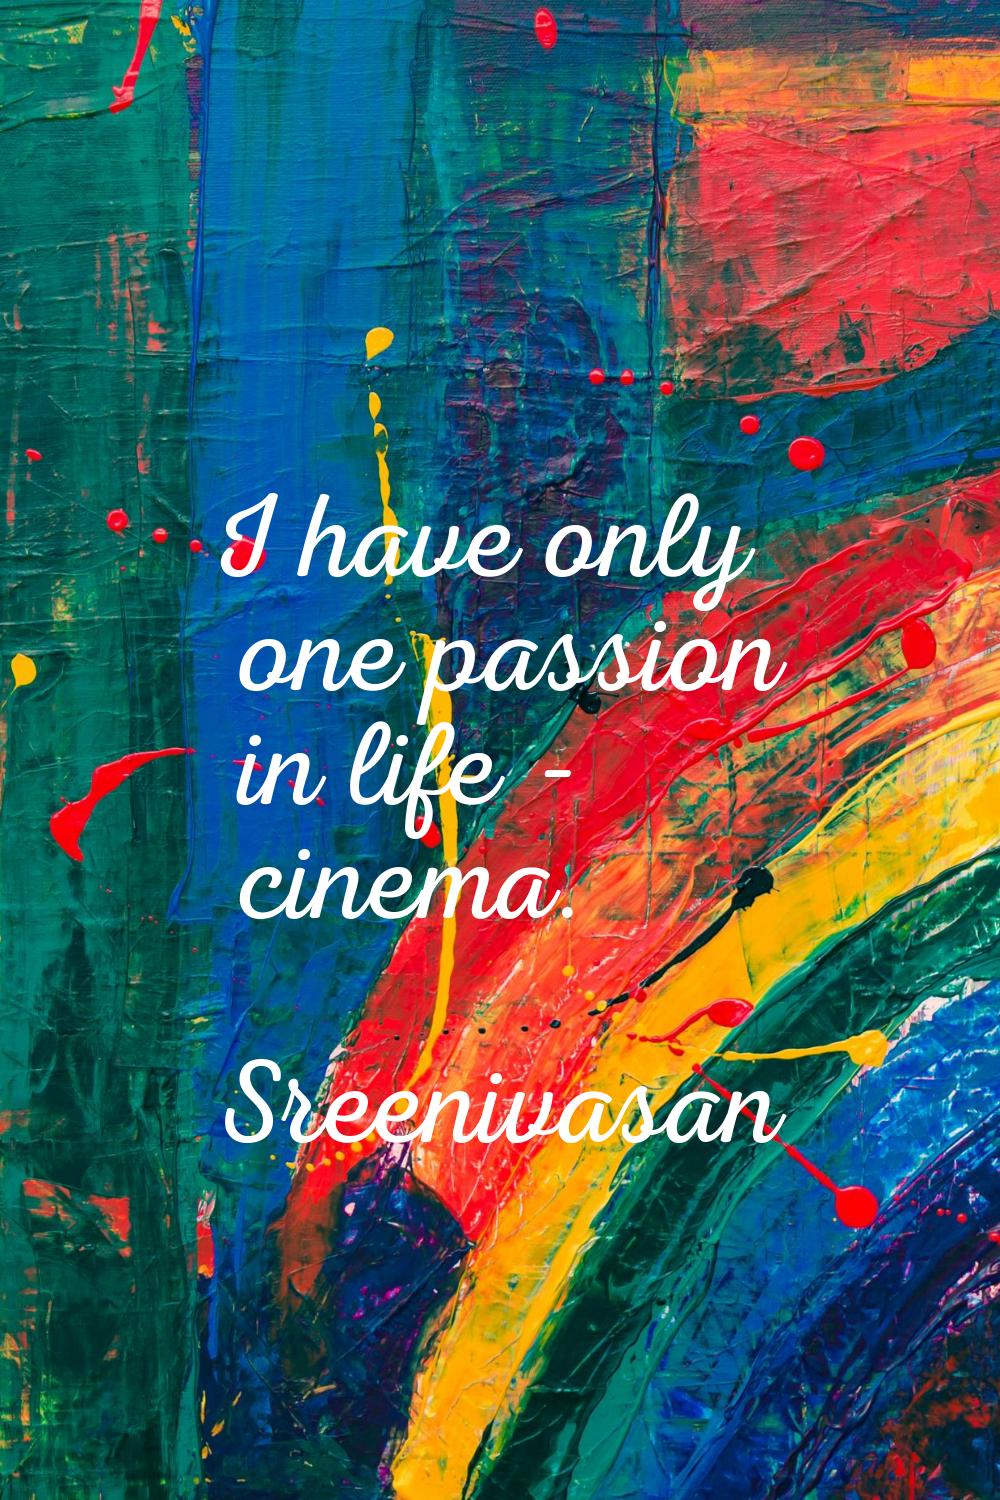 I have only one passion in life - cinema.